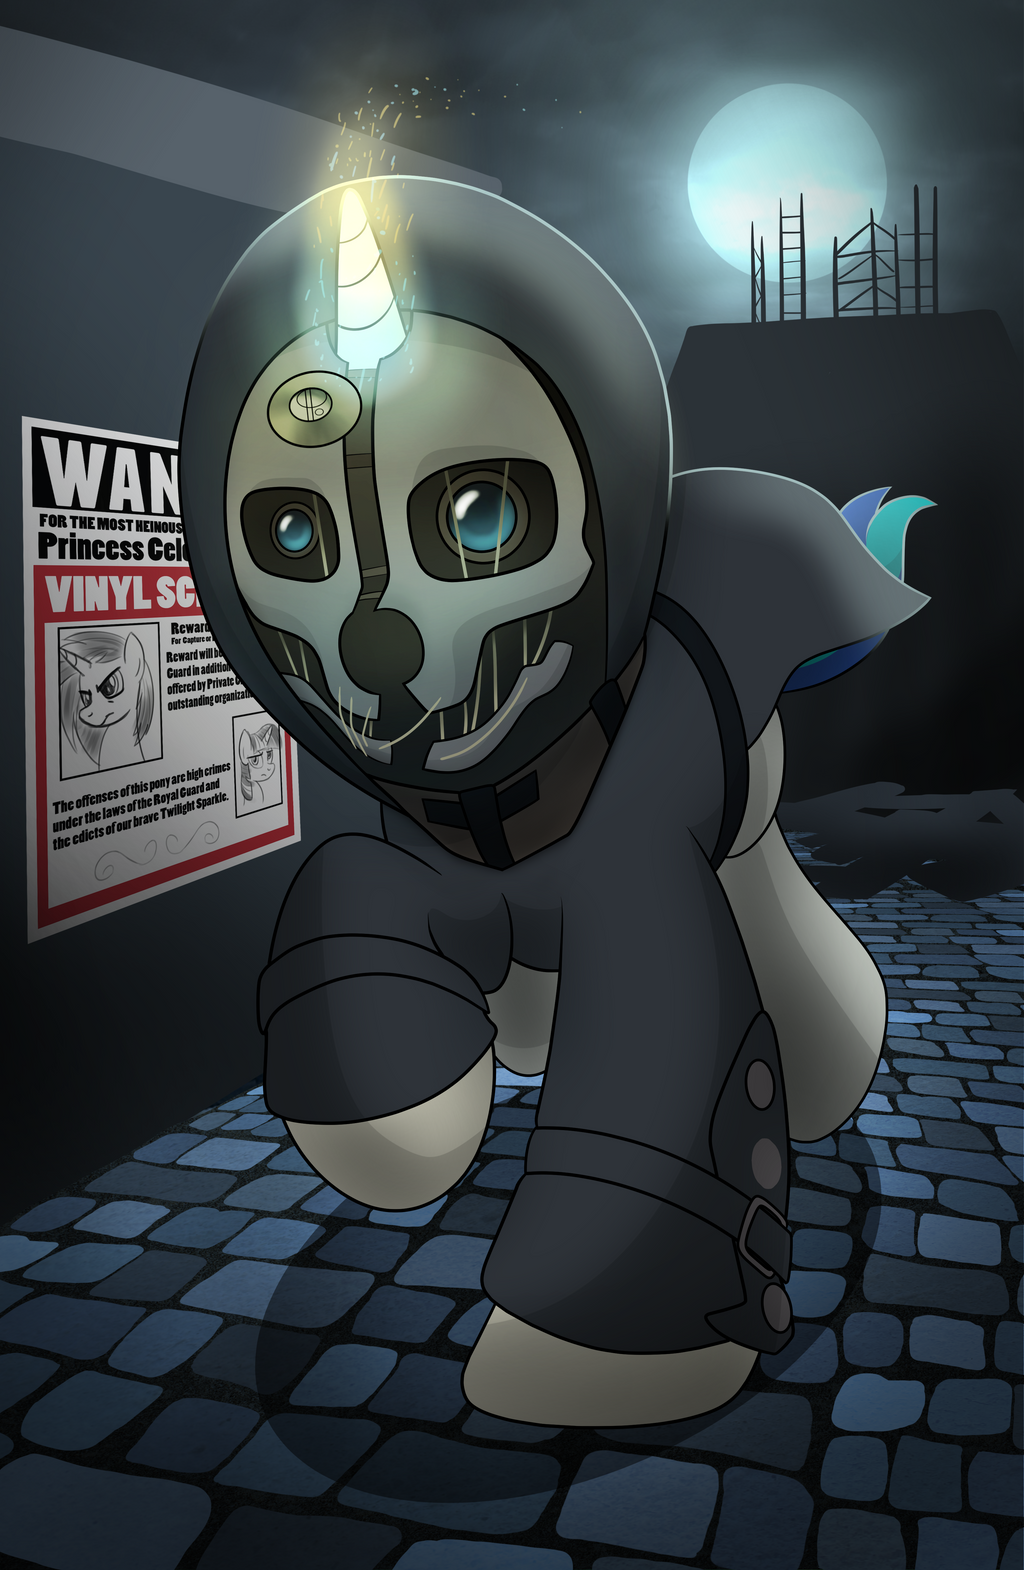 [Obrázek: dishonored_commission_by_drawponies-d81wm0w.png]